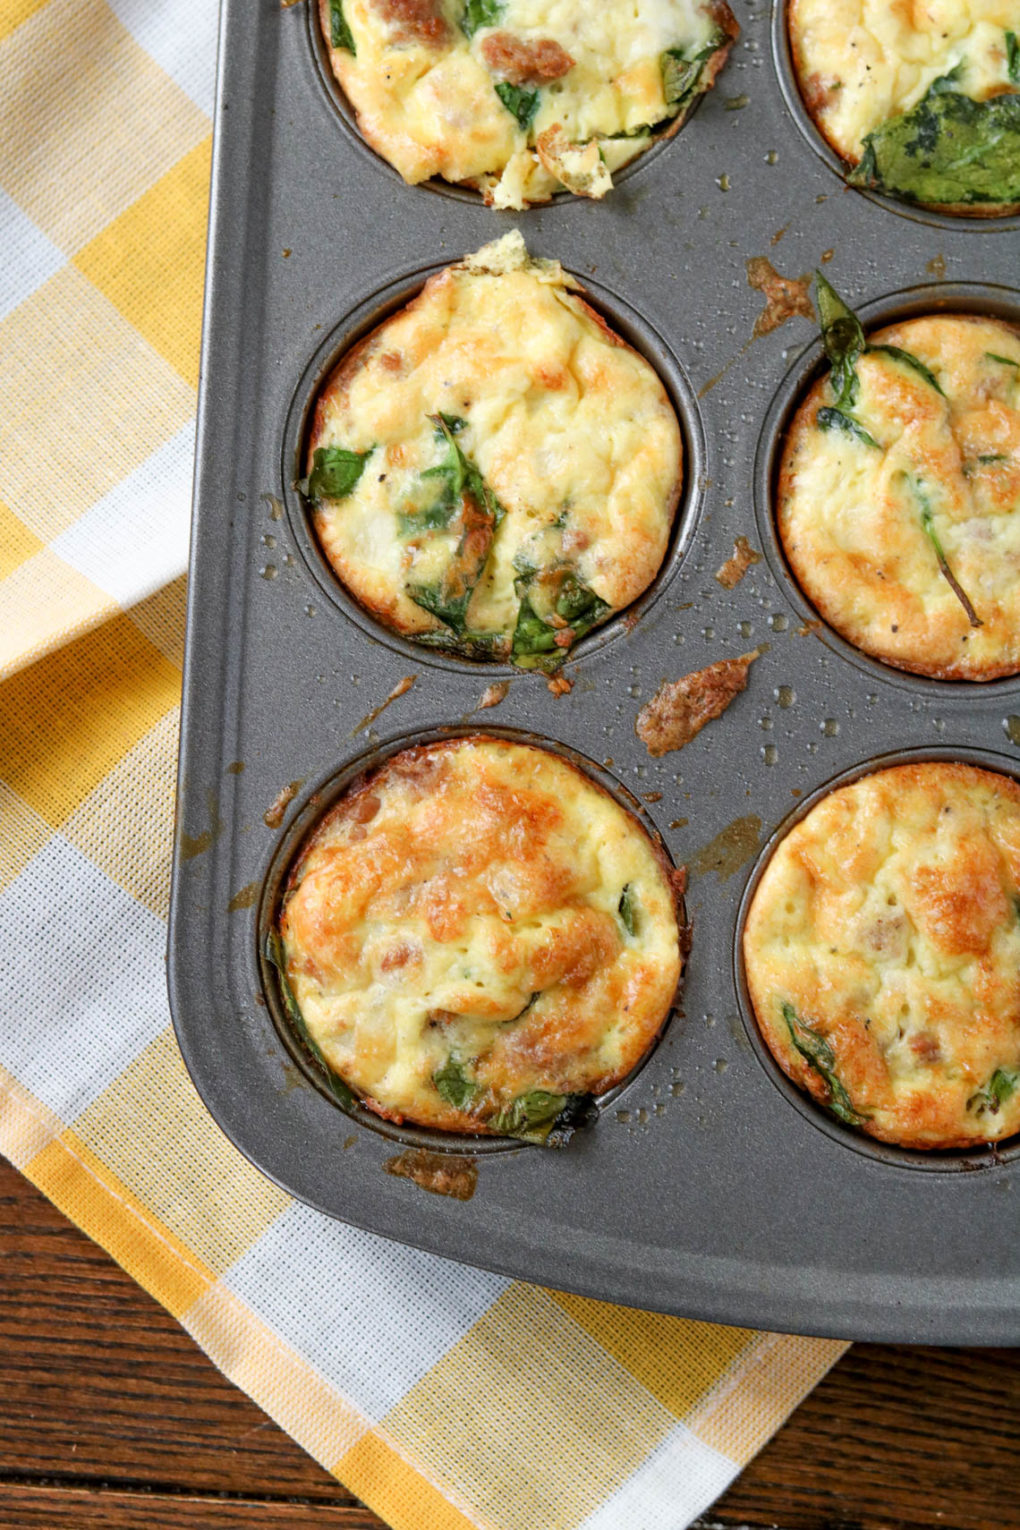 A muffin tin with spinach sausage egg muffins. The silver muffin tin is sitting on a wood table with a yellow and white checkered towel underneath. 